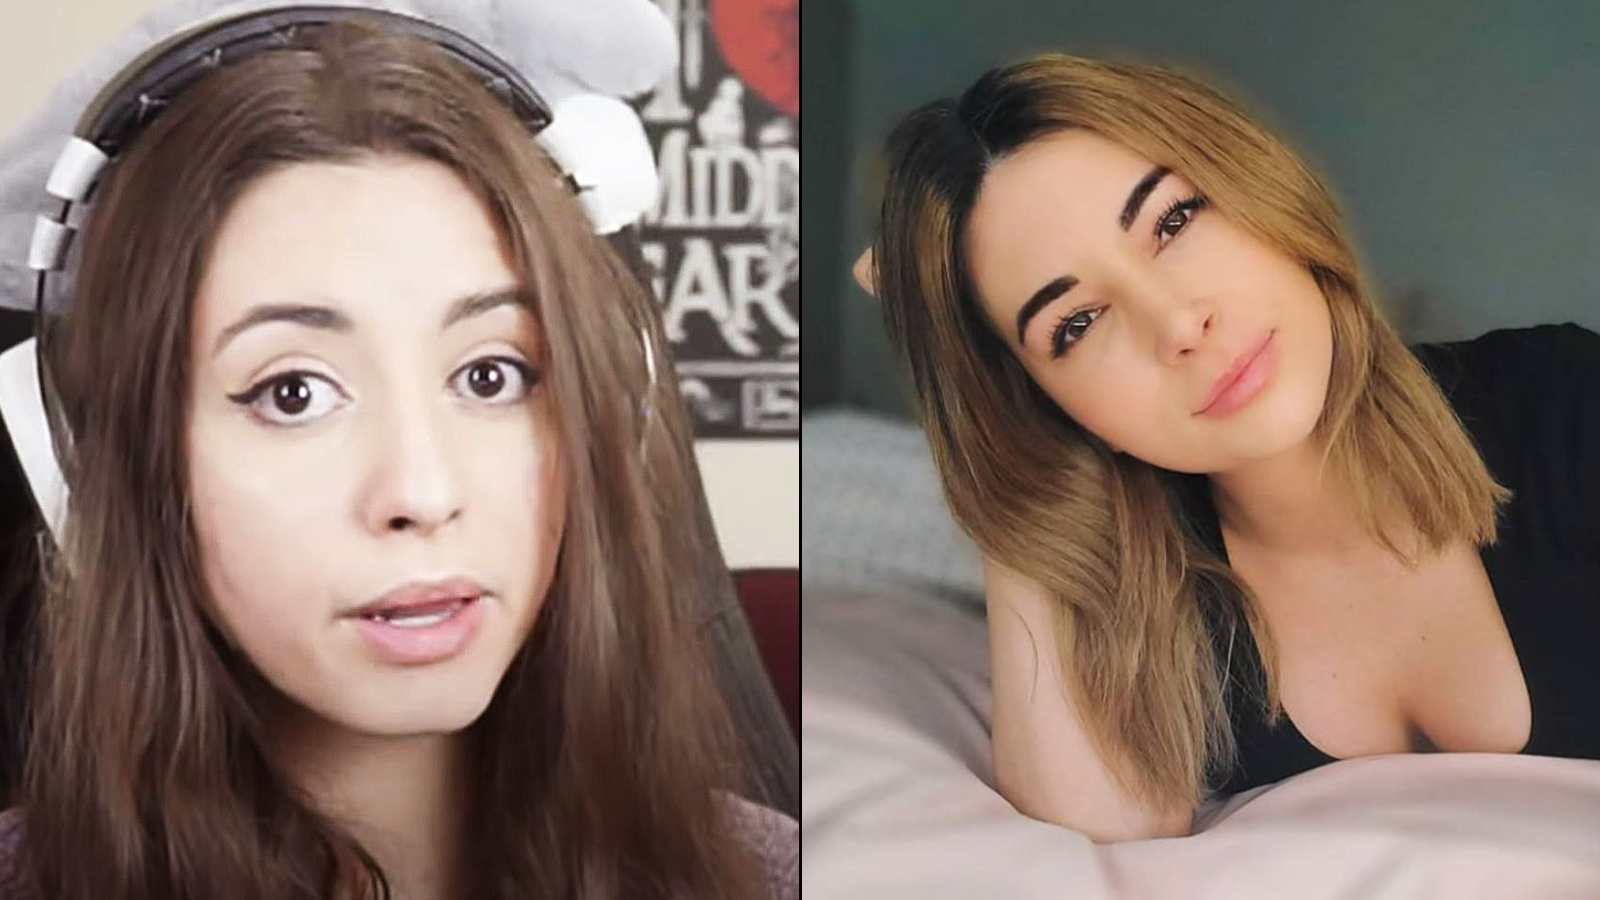 Sweet Anita explains how she avoids Twitch slip-ups after Alinity ban - Dex...